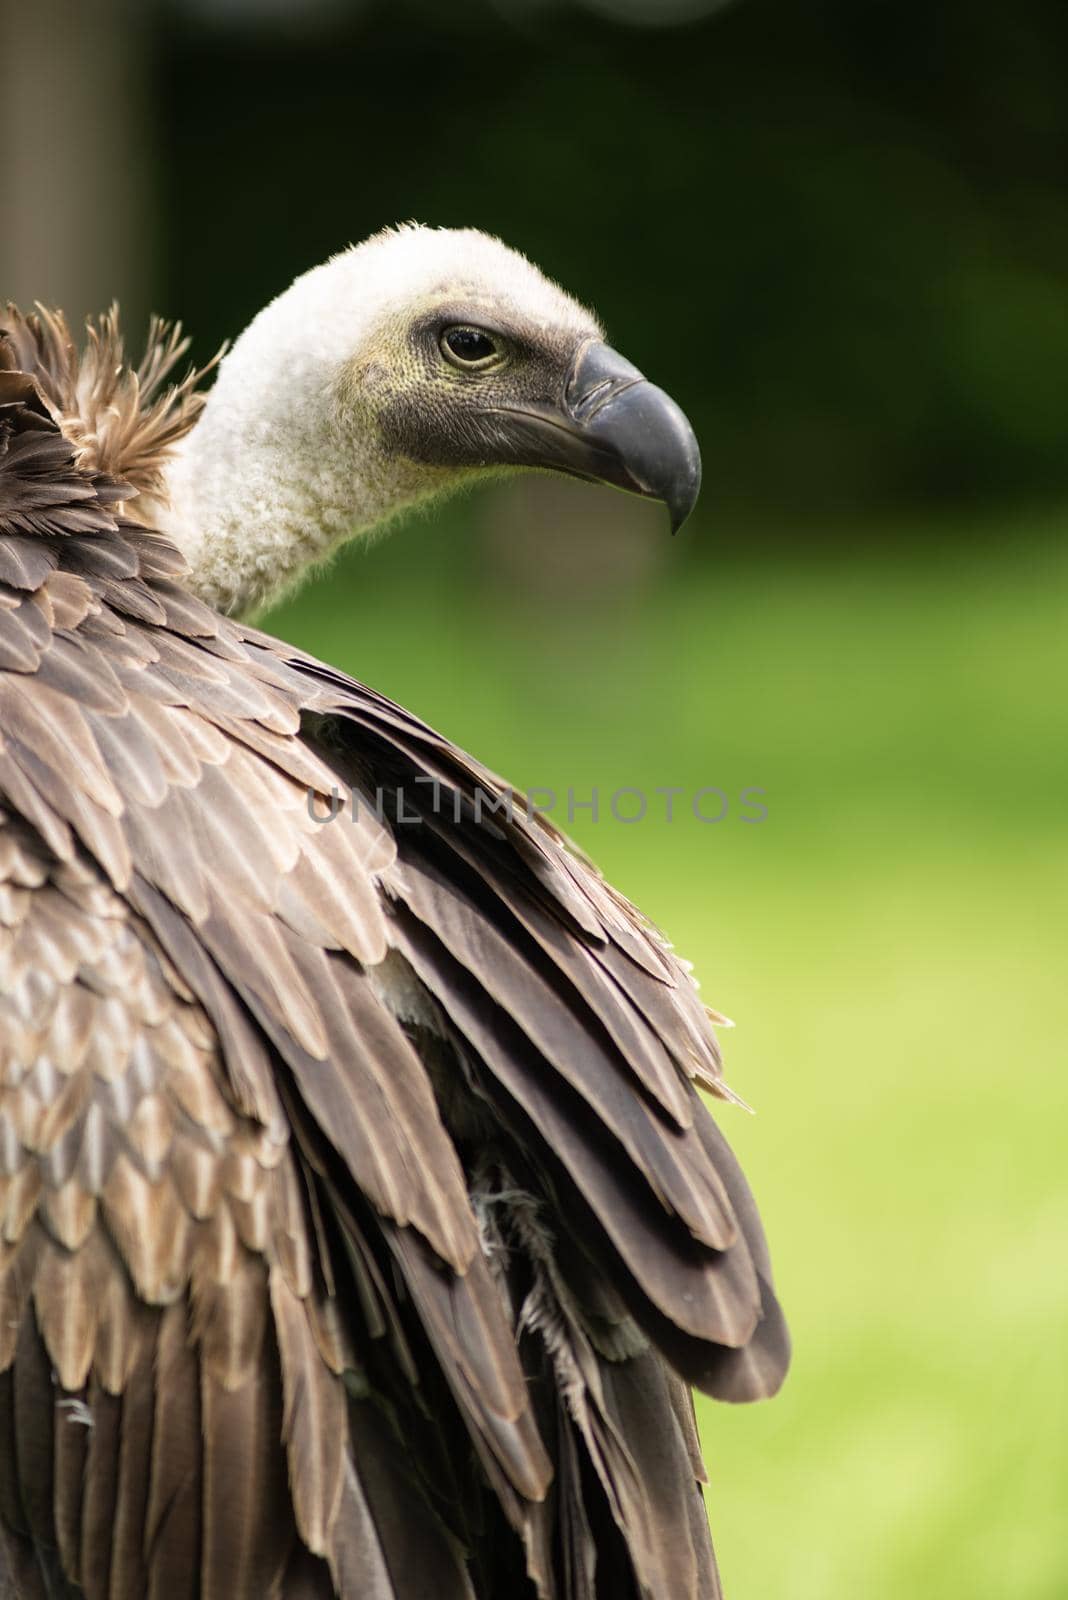 Closeup portrait of a white-backed vulture ( Gyps Africanus ) outdoors with a green background bird of prey by LeoniekvanderVliet